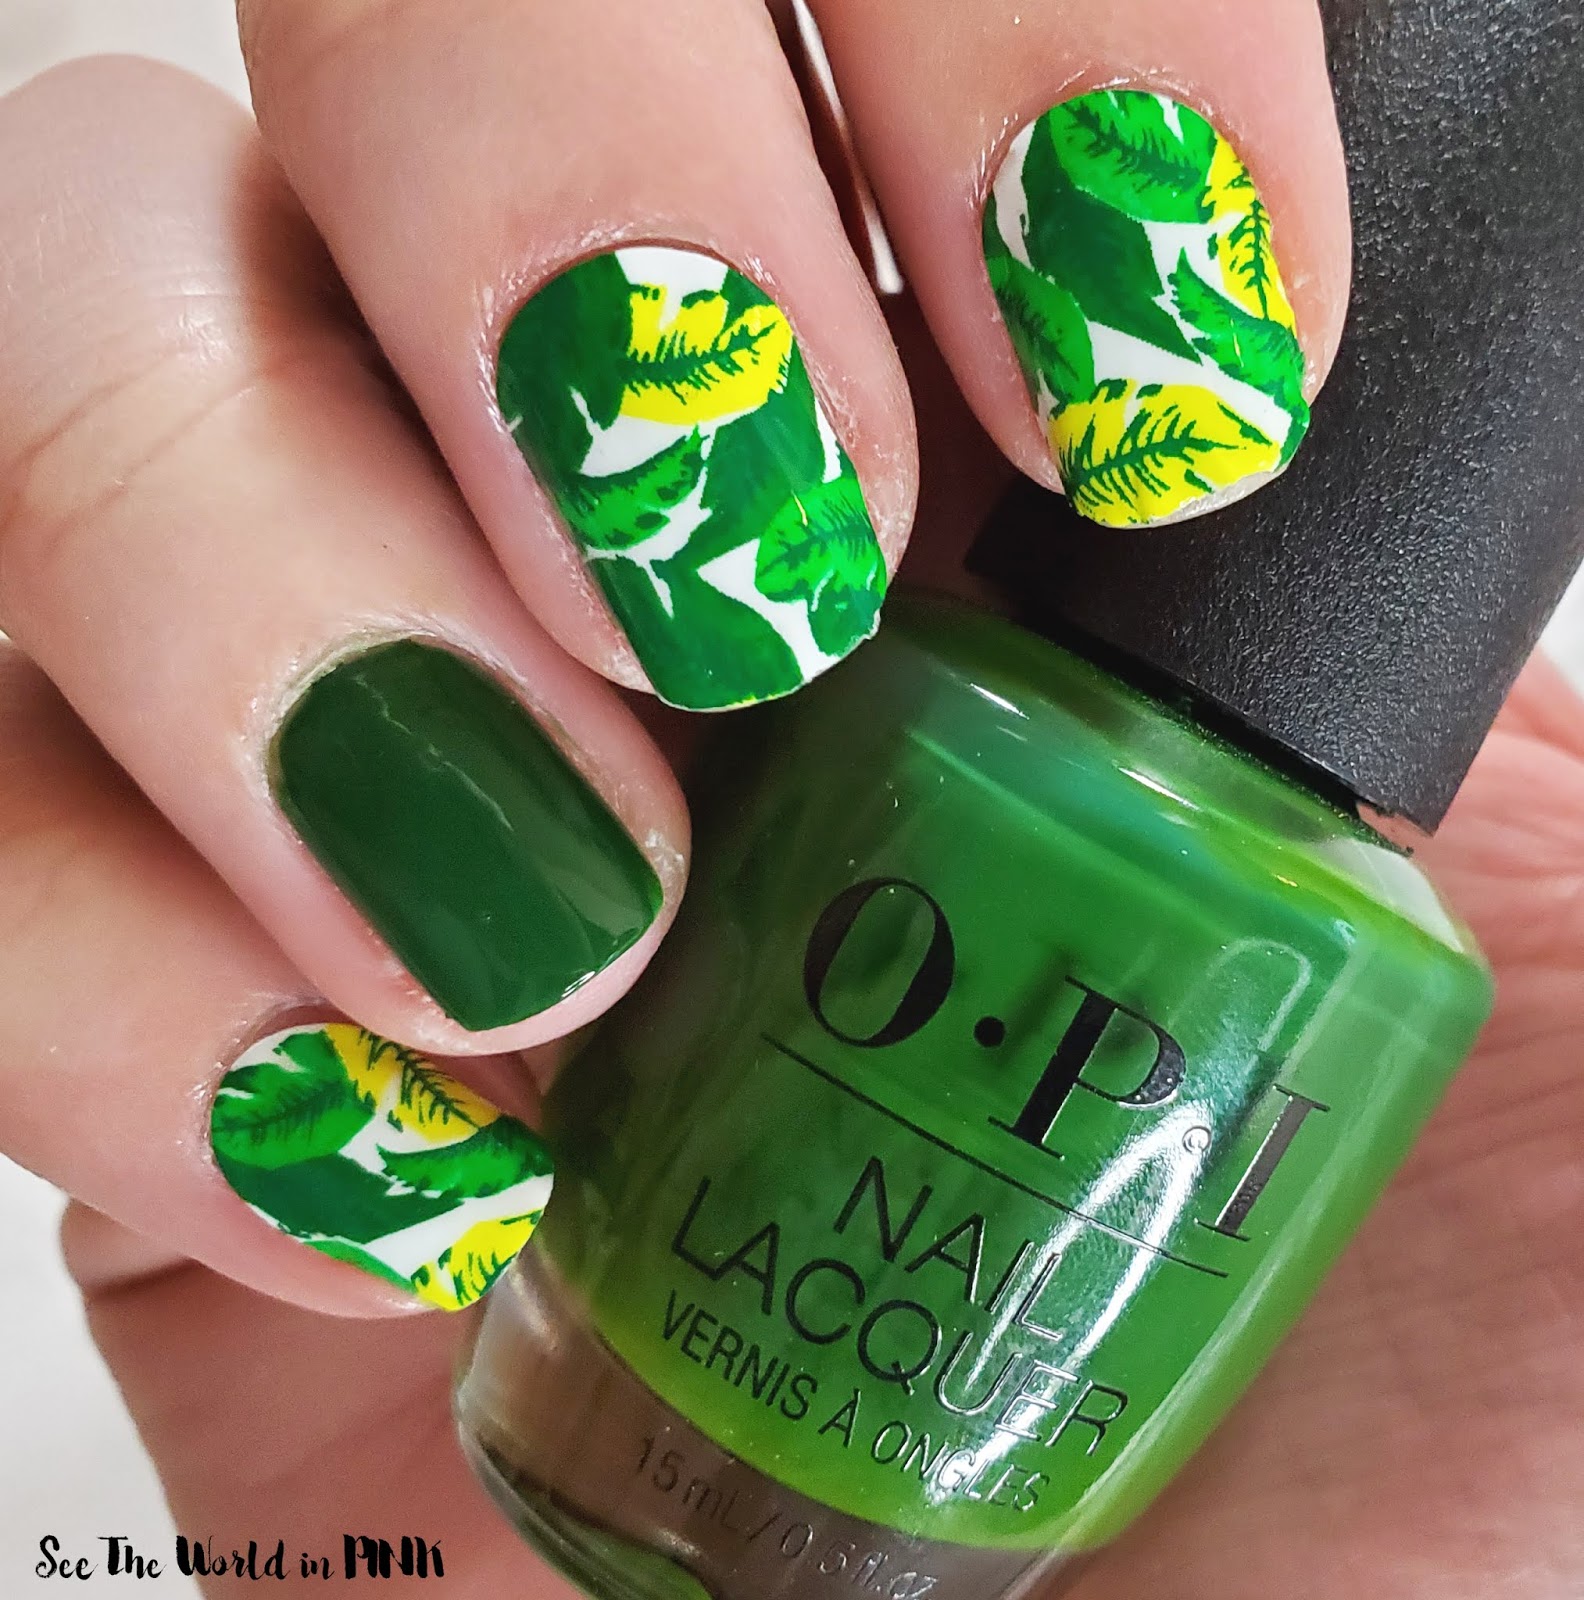 Manicure Monday - Green and Leafy Nails